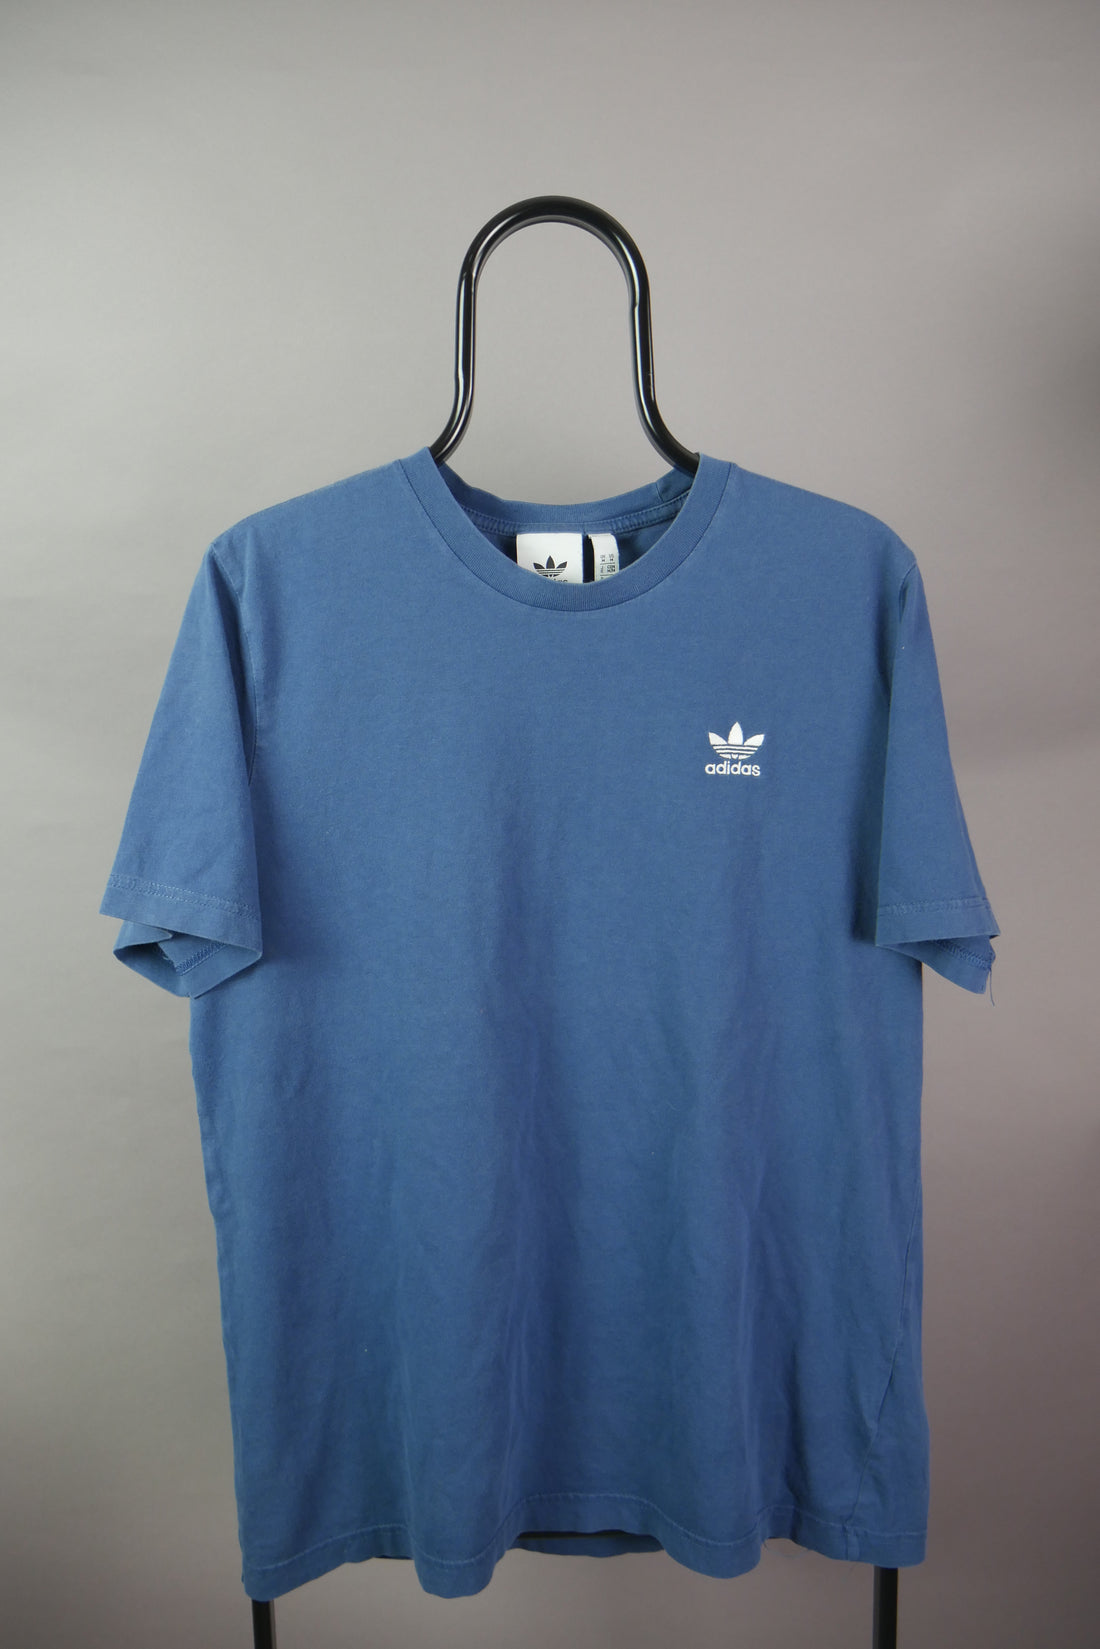 The Adidas Embroidered Logo T-Shirt (M)